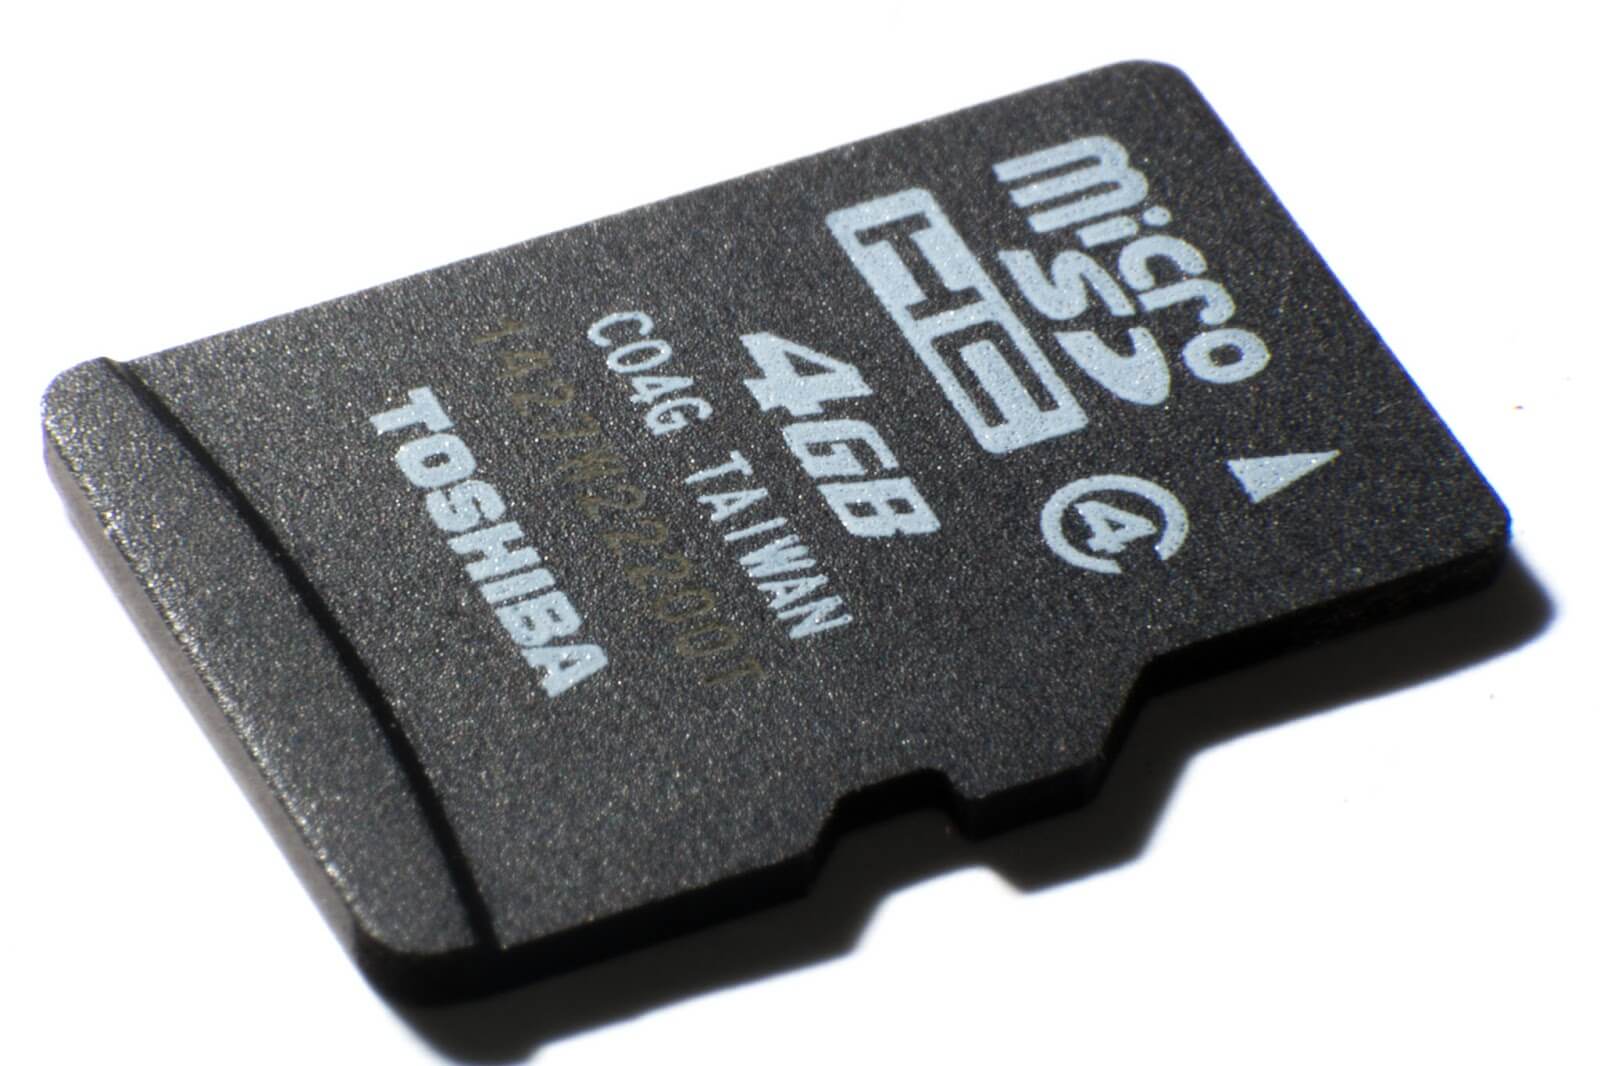 Utilize An External Micro SD Card to Free up Storage Space on Samsung Galaxy Phone